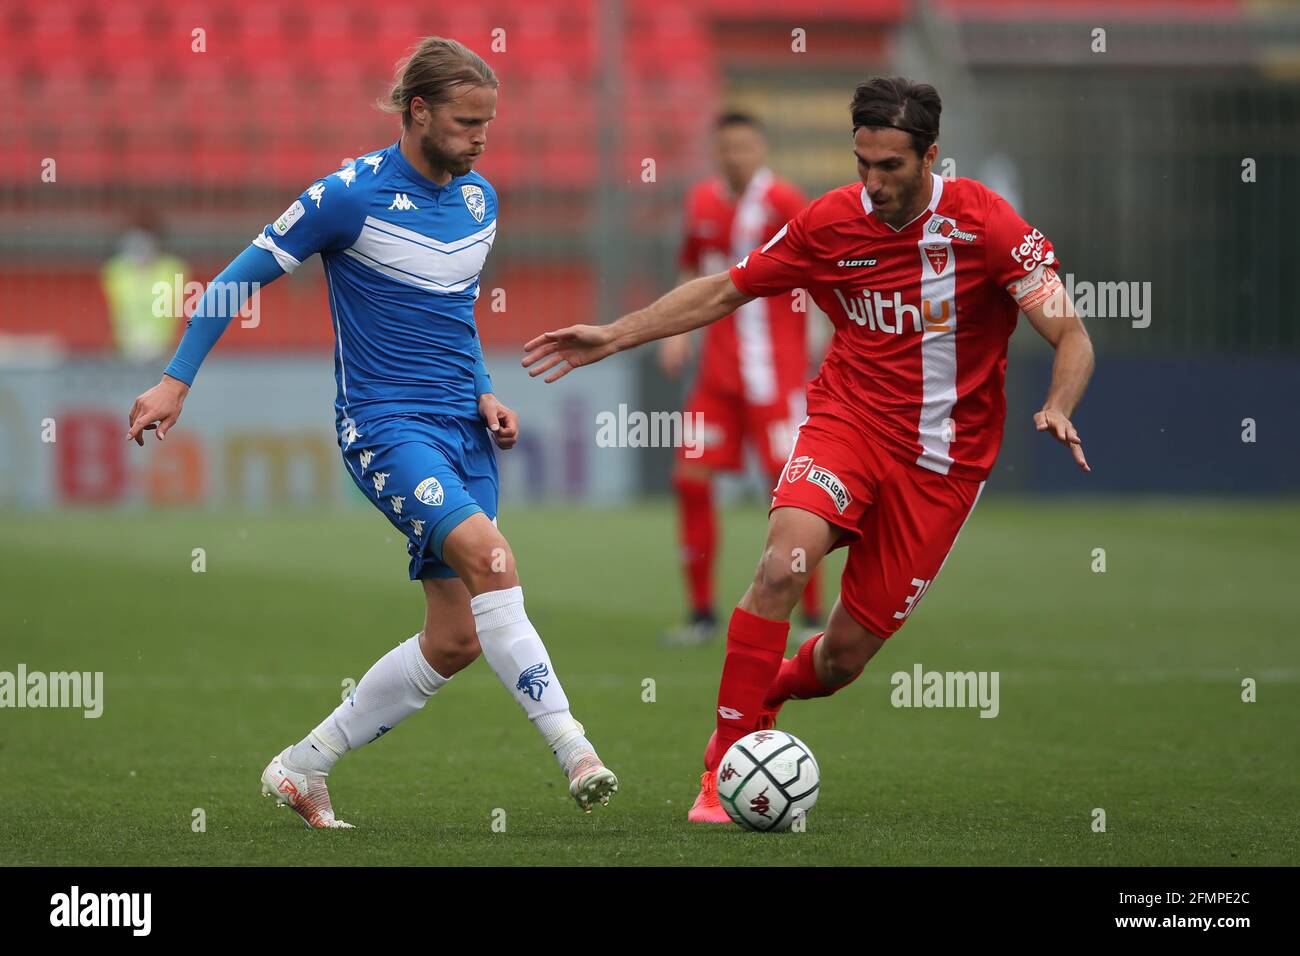 Monza, , 10th May 2021. Birkir Bjarnason of Brescia Calcio plays the ball as Mario Sampirisi of AC Monza closes in during the Serie B match at U-Power Stadium, Monza. Picture credit should read: Jonathan Moscrop / Sportimage Stock Photo